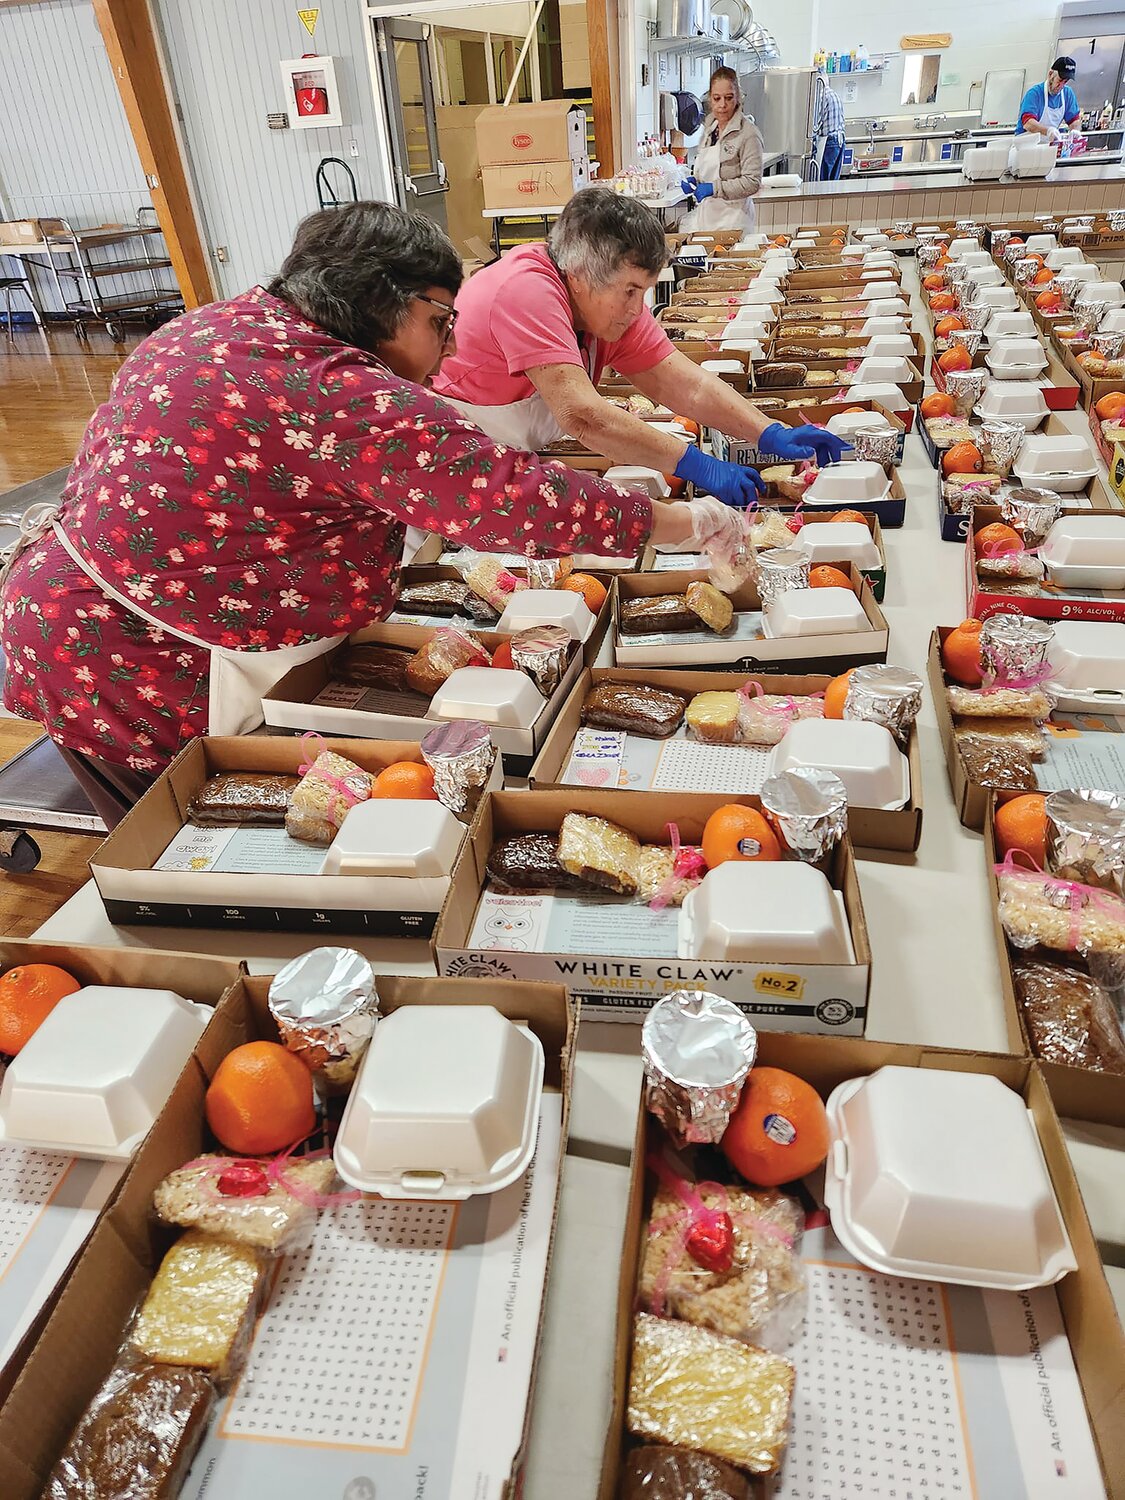 In their cooking, serving, packaging, delivering, dedicated volunteers are helping the West Bay one meal at a time.